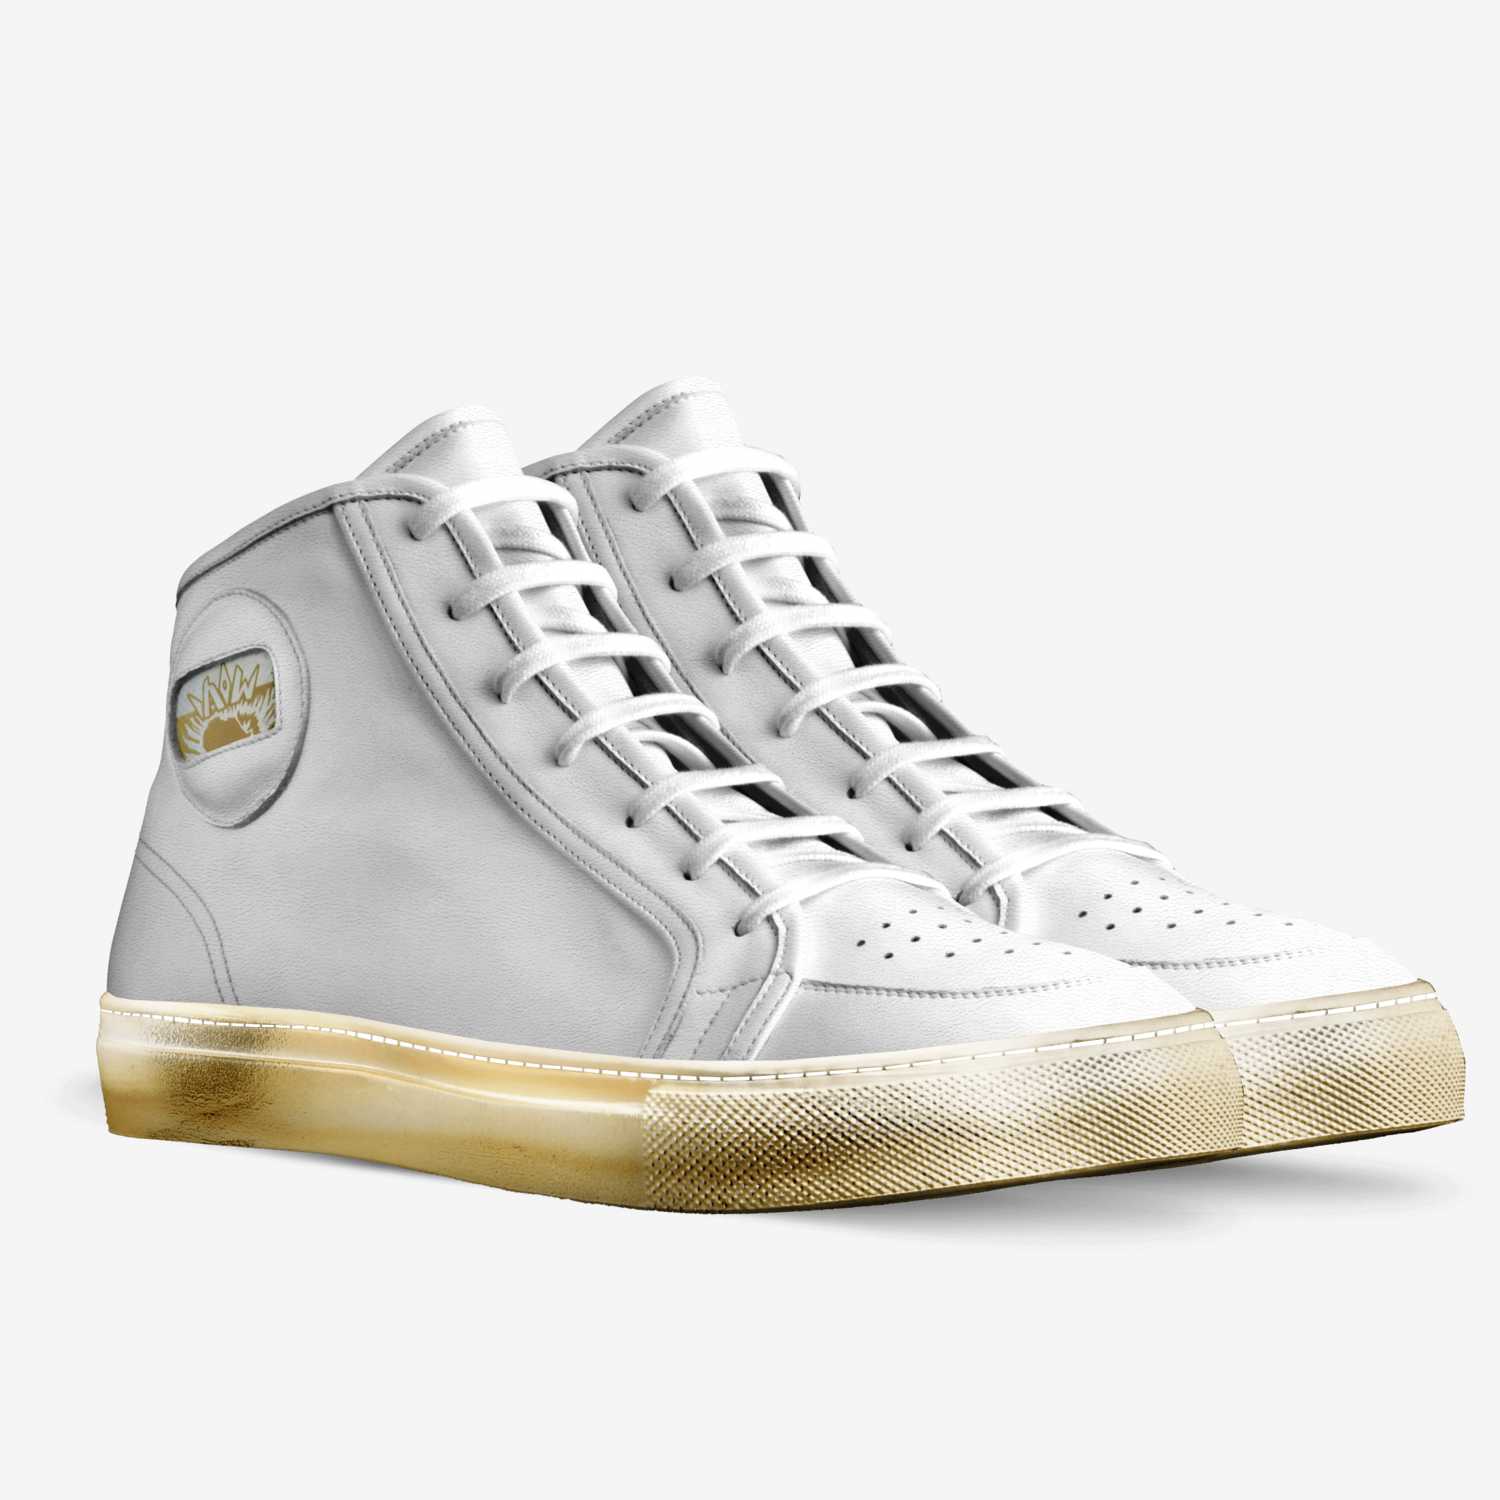 ADUBS WHITE/GOLD | A Custom Shoe concept by Adrian Willis